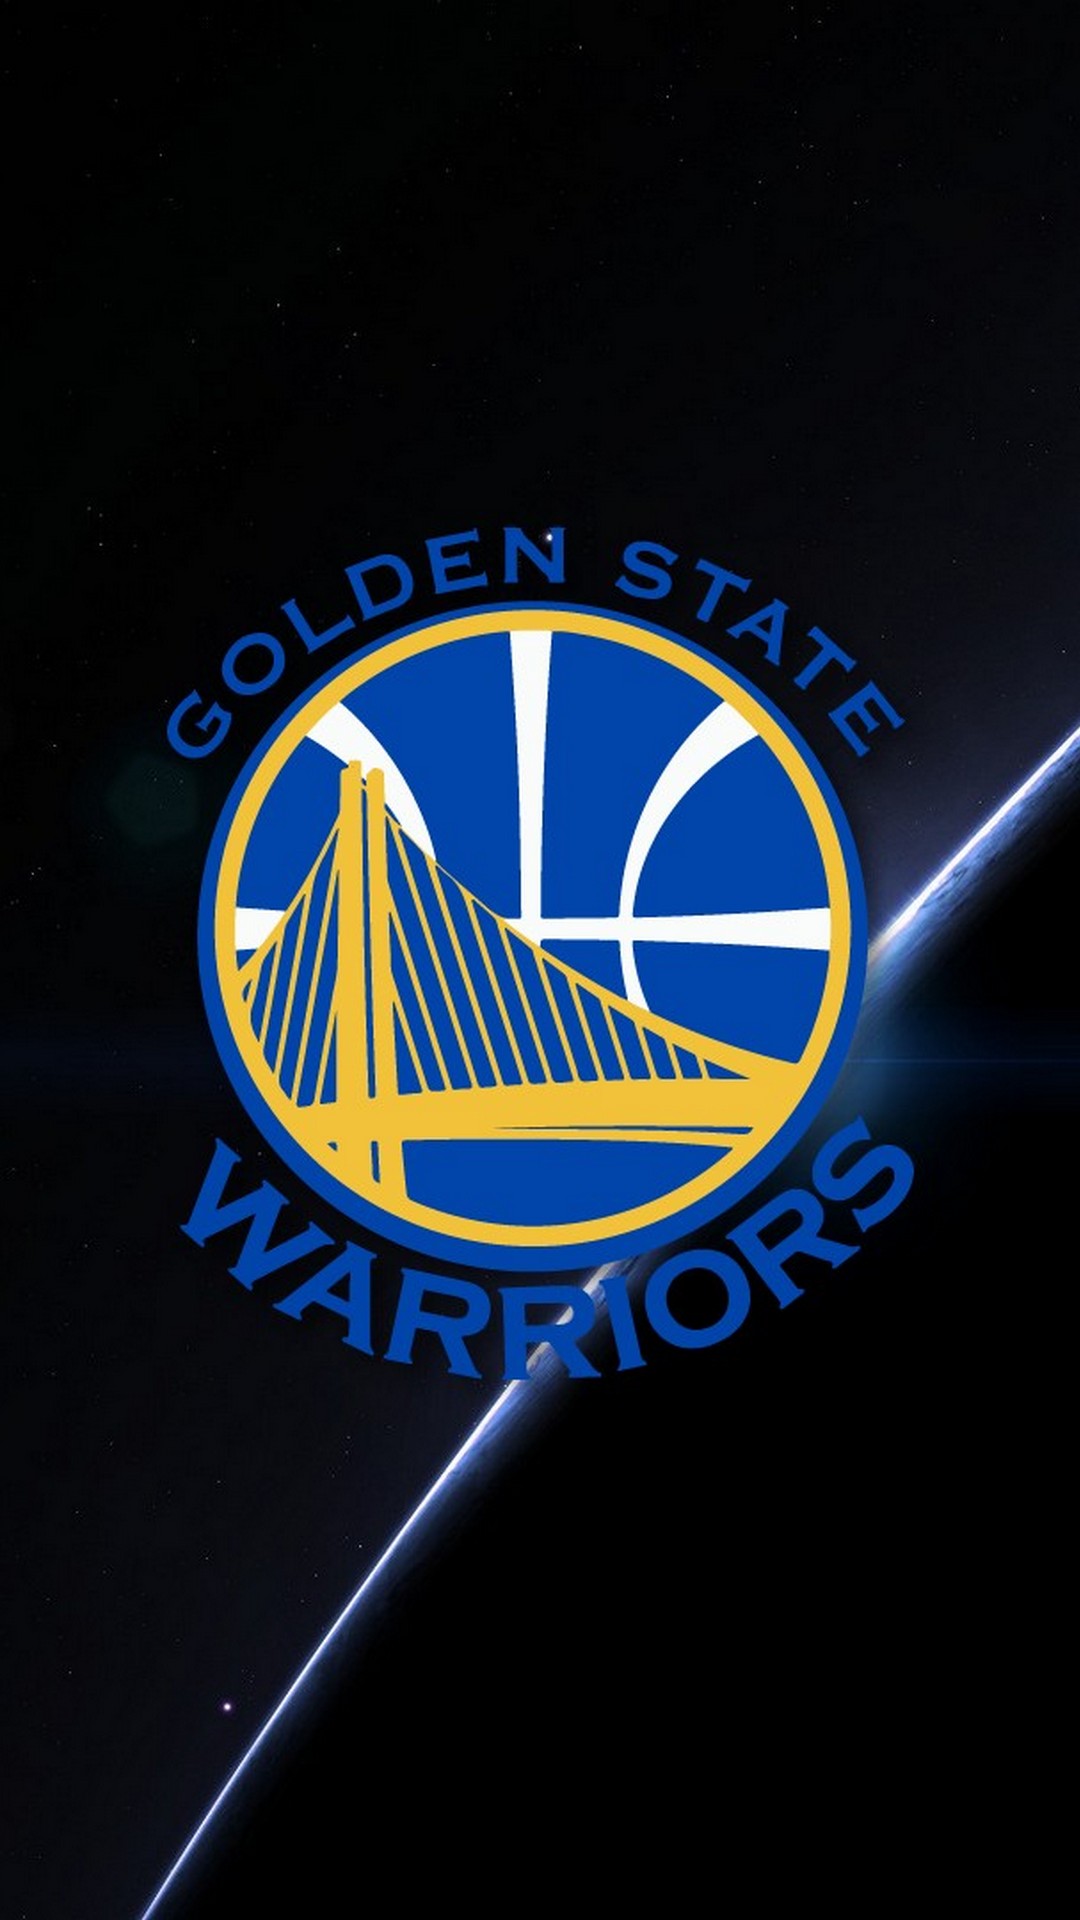 Golden State Warriors Wallpaper For Mobile with image dimensions 1080x1920 pixel. You can make this wallpaper for your Desktop Computer Backgrounds, Windows or Mac Screensavers, iPhone Lock screen, Tablet or Android and another Mobile Phone device